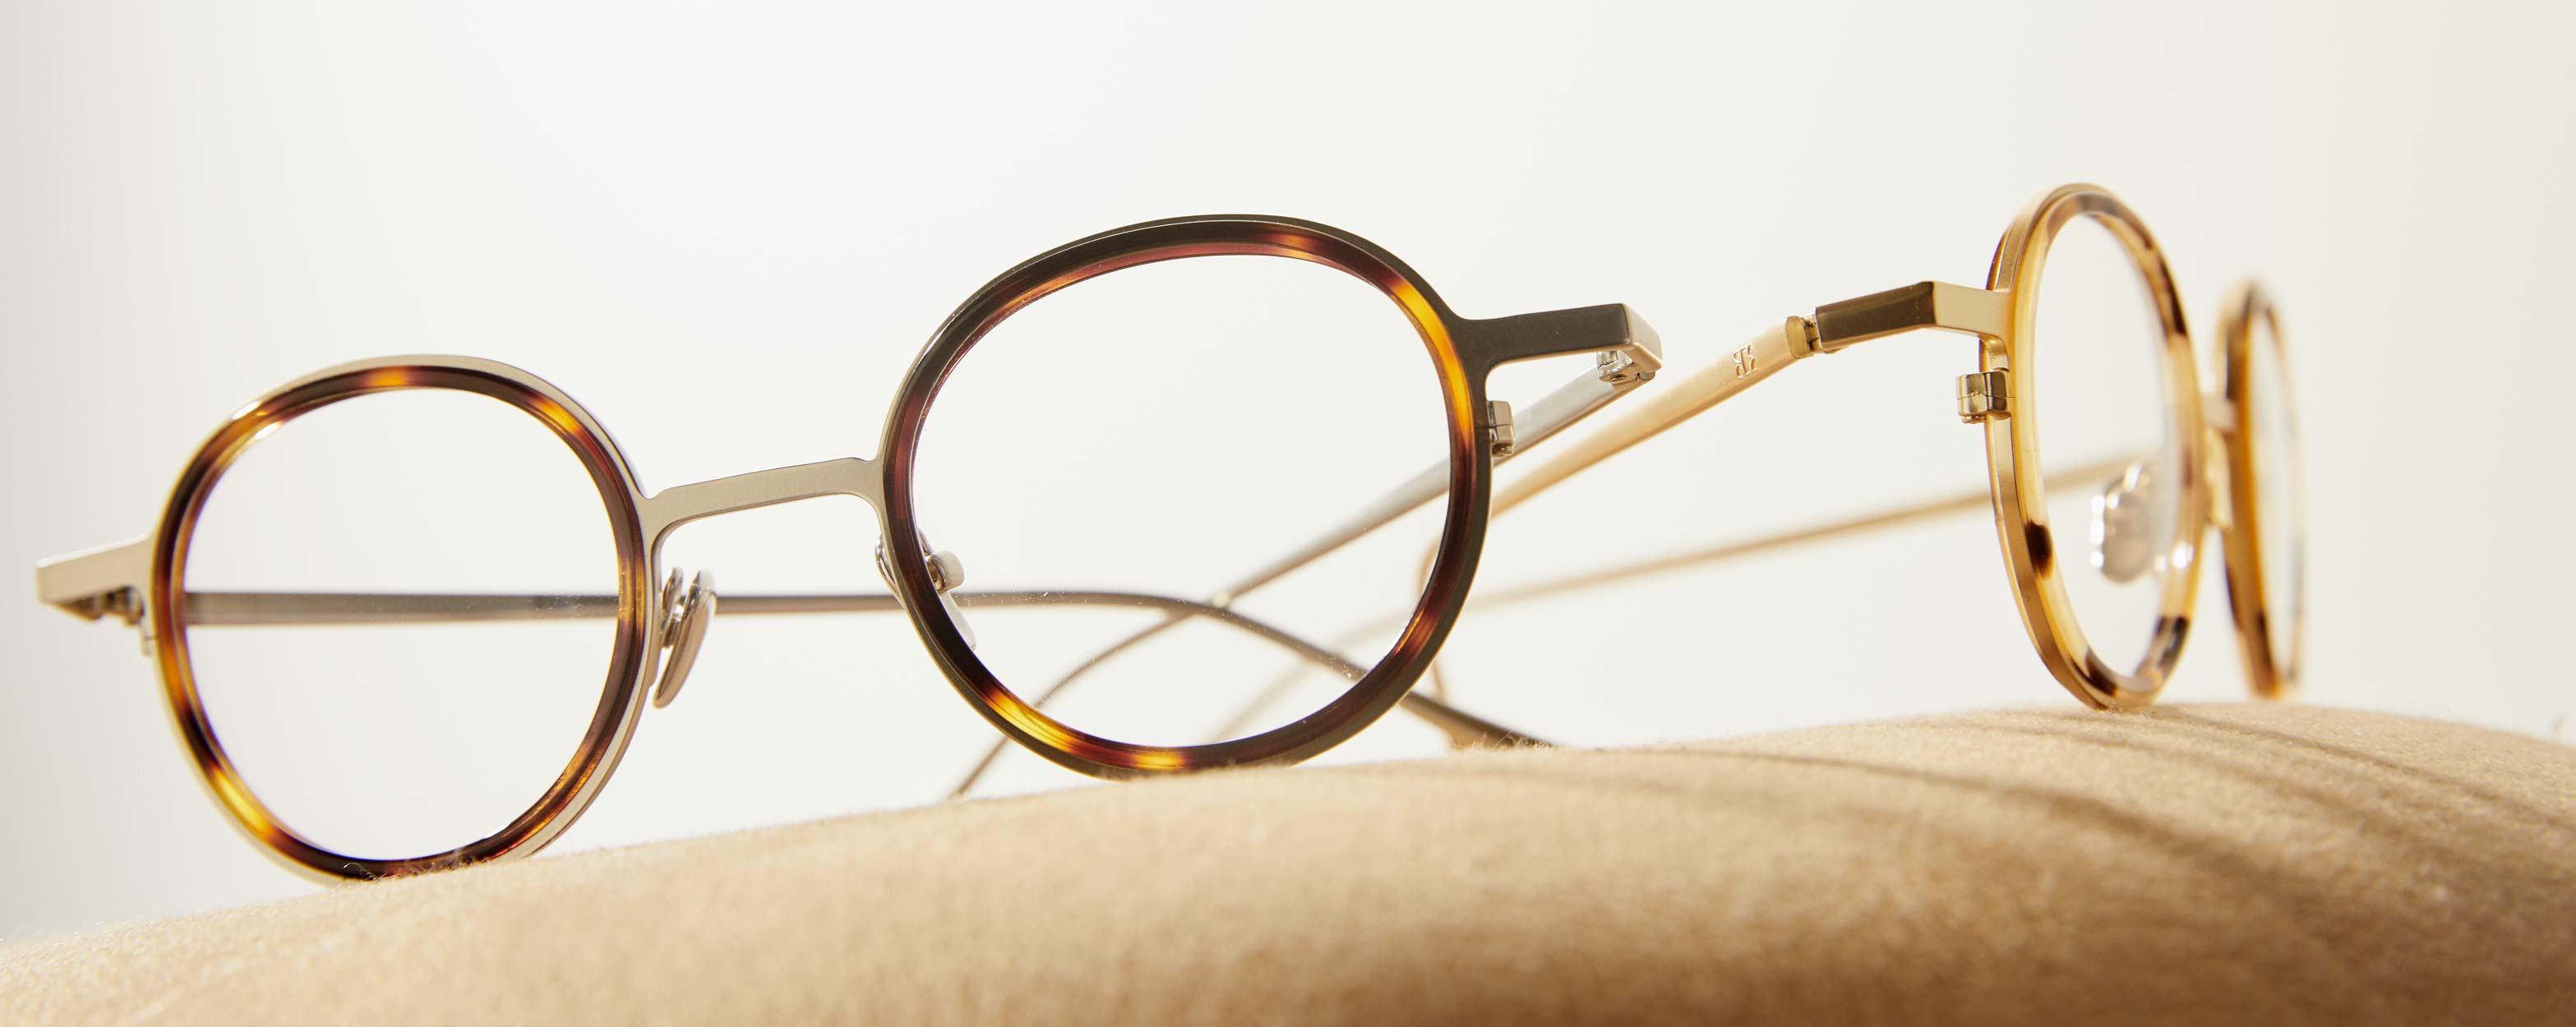 Photo Details of Arthur Brown Marble & Mat Gold Reading Glasses in a room